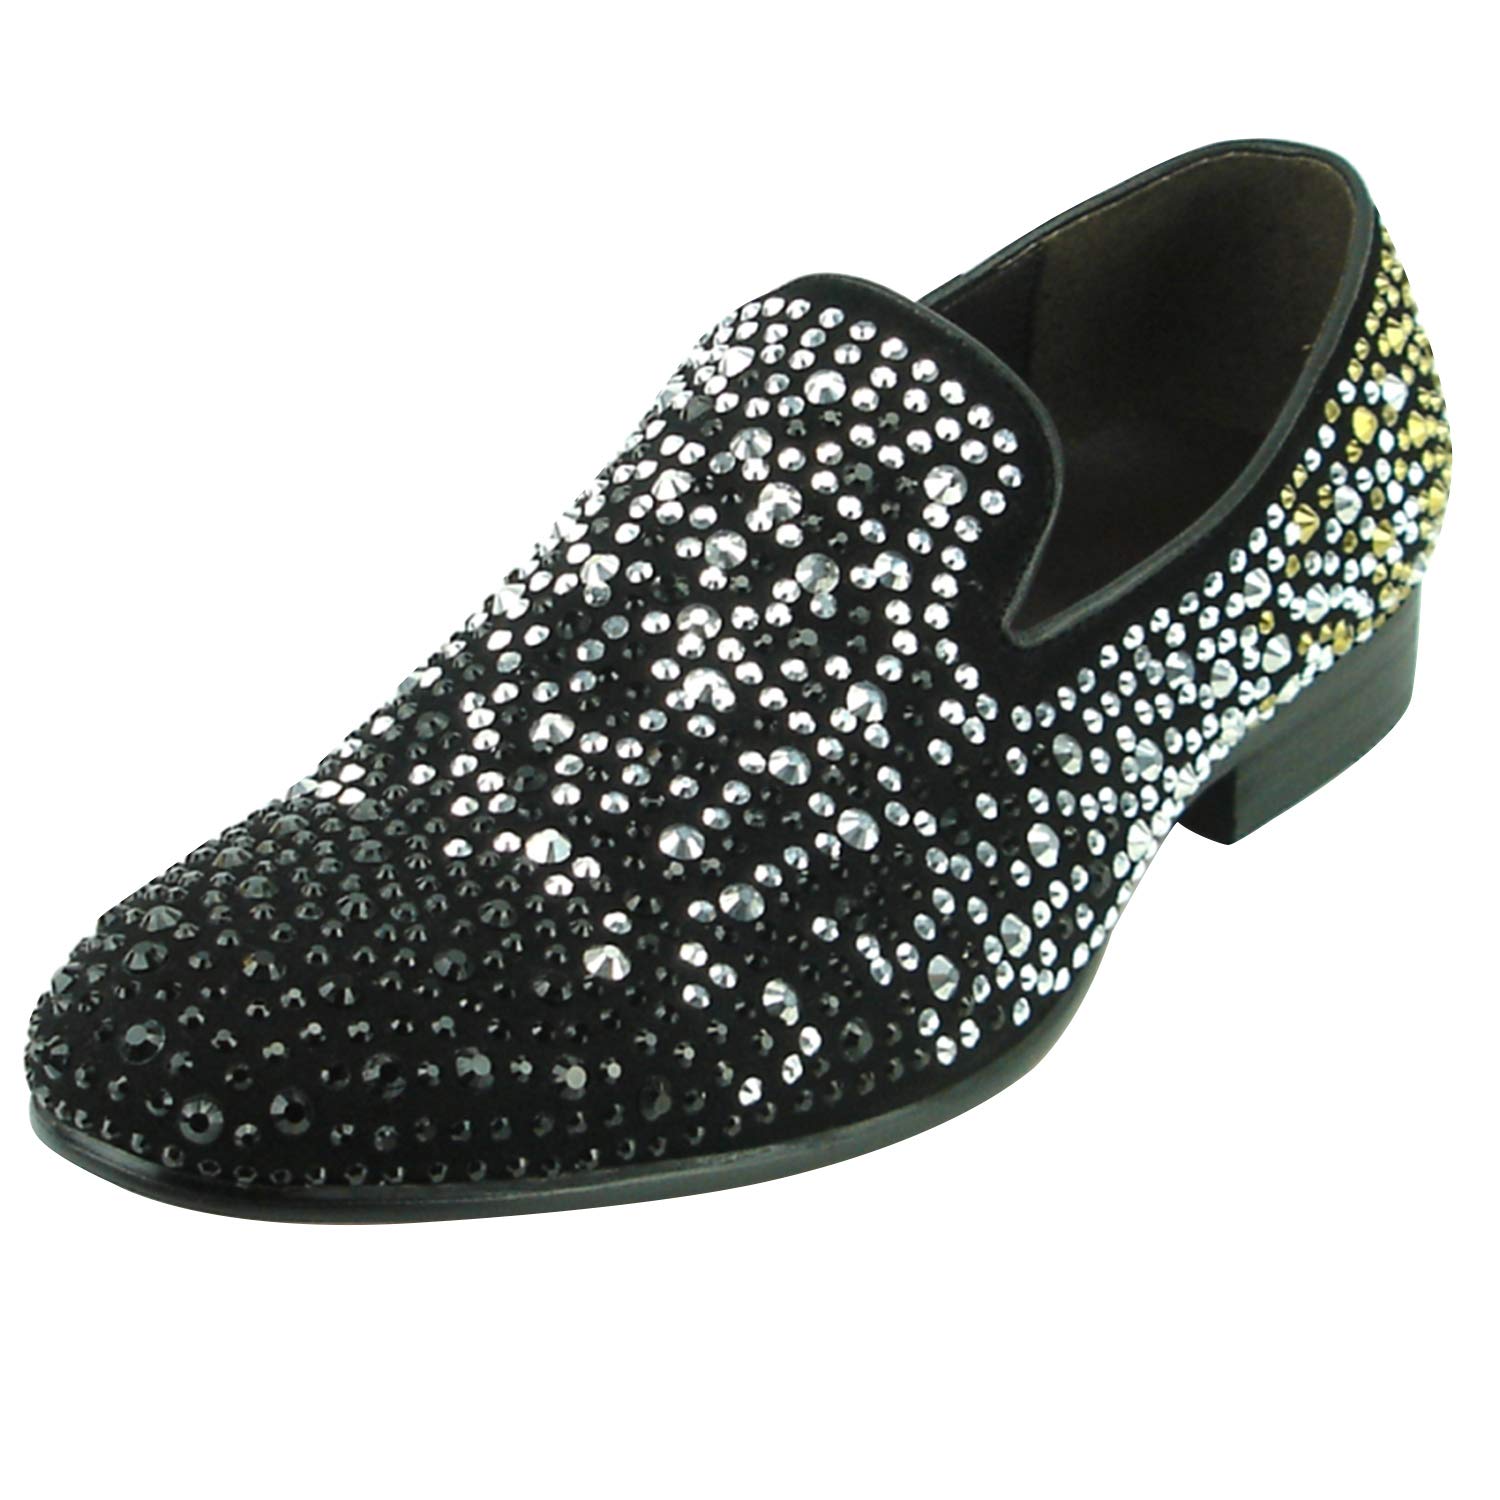 mens black dress shoes with red soles